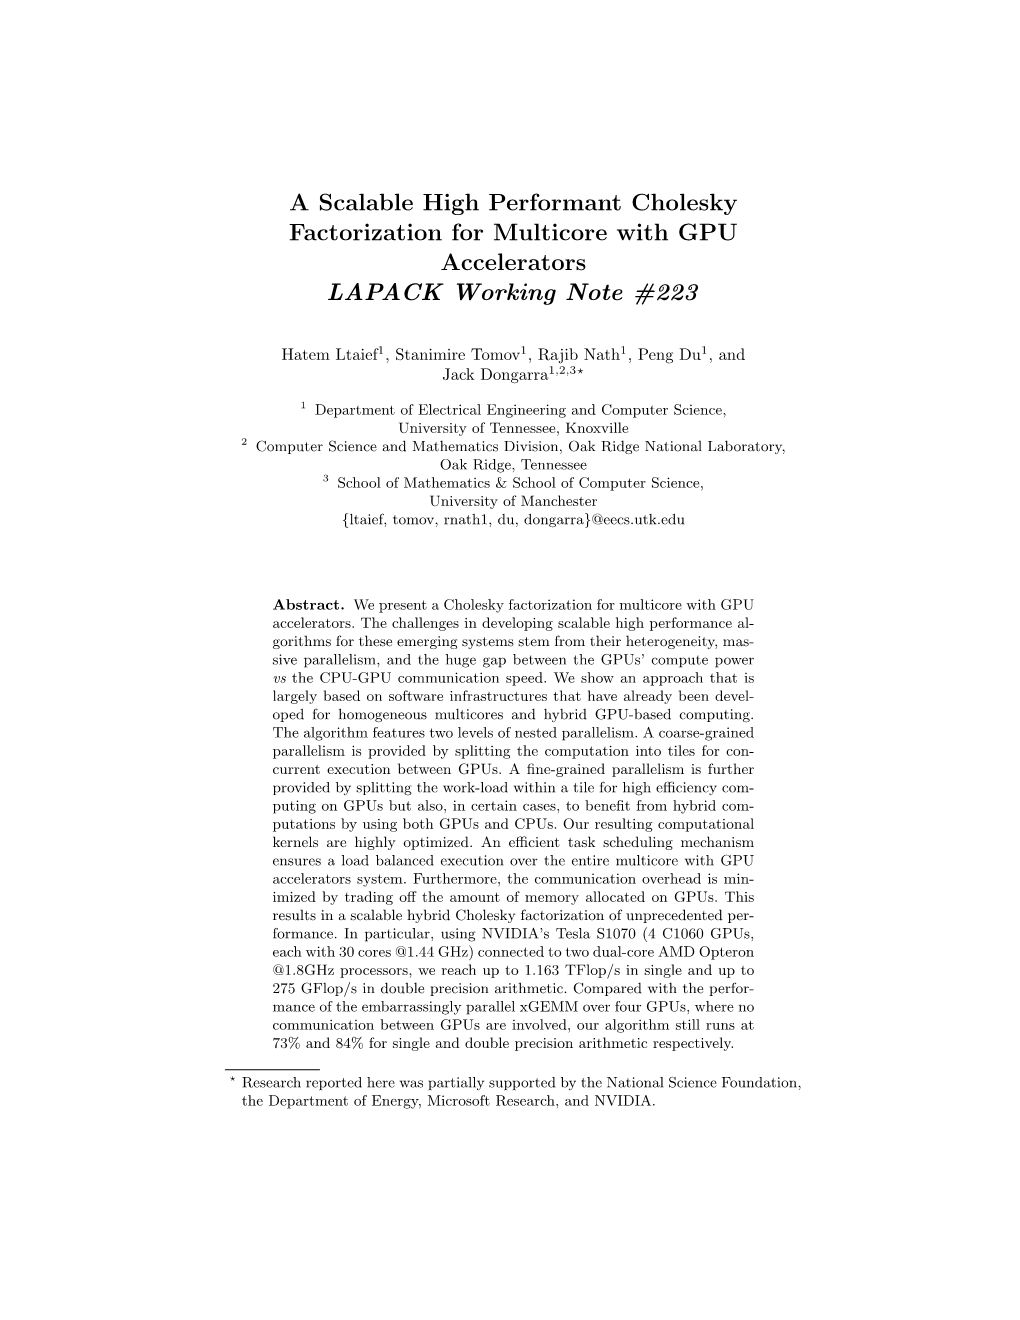 A Scalable High Performant Cholesky Factorization for Multicore with GPU Accelerators LAPACK Working Note #223